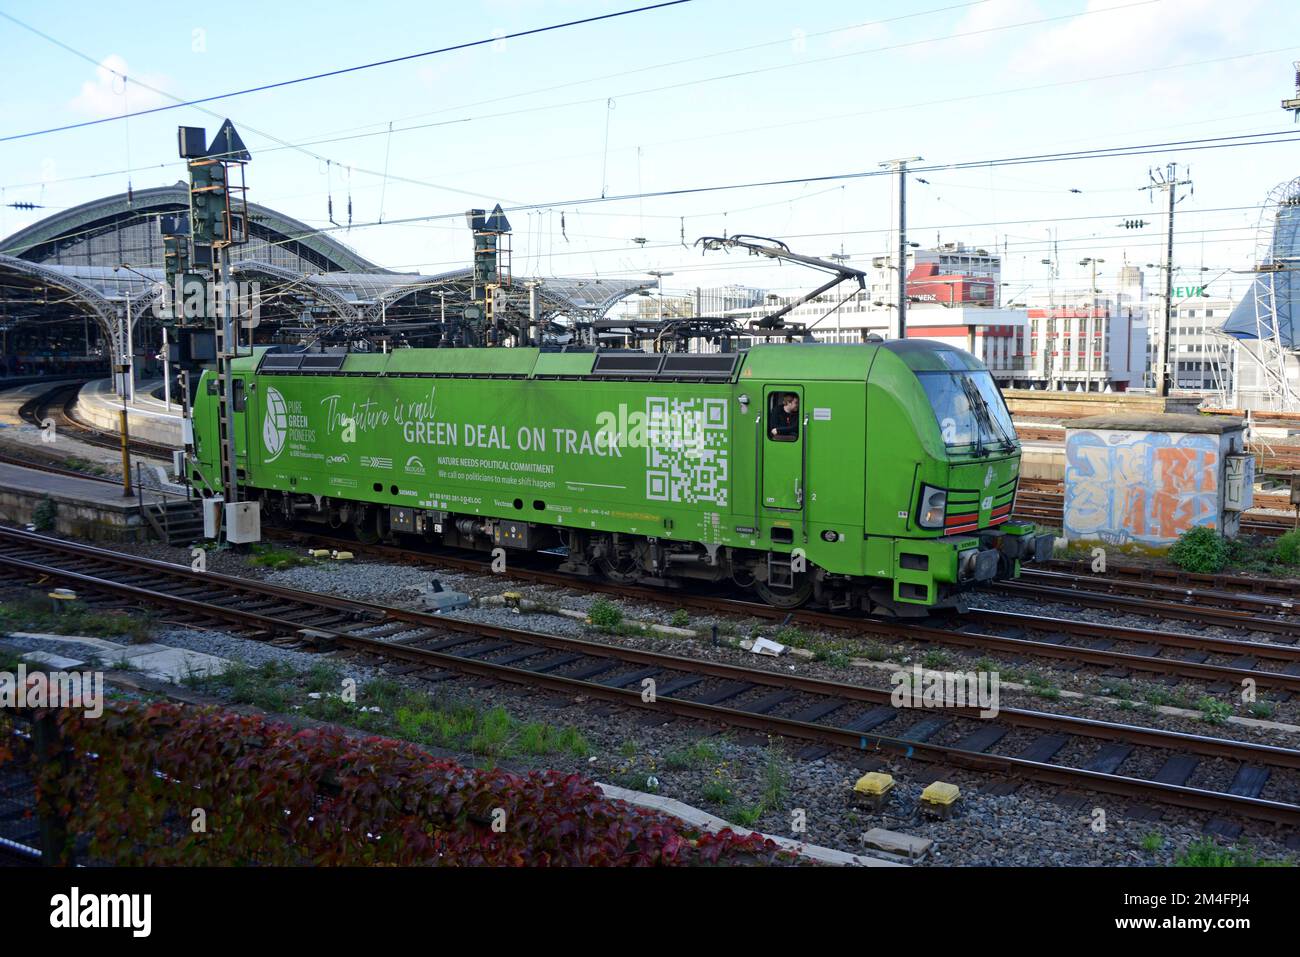 Siemens Vectron zero emission electric locomotive labelled 'Green Deal on Track' operated by TX Logistik at Cologne HBF Central Station, Germany, 2022 Stock Photo